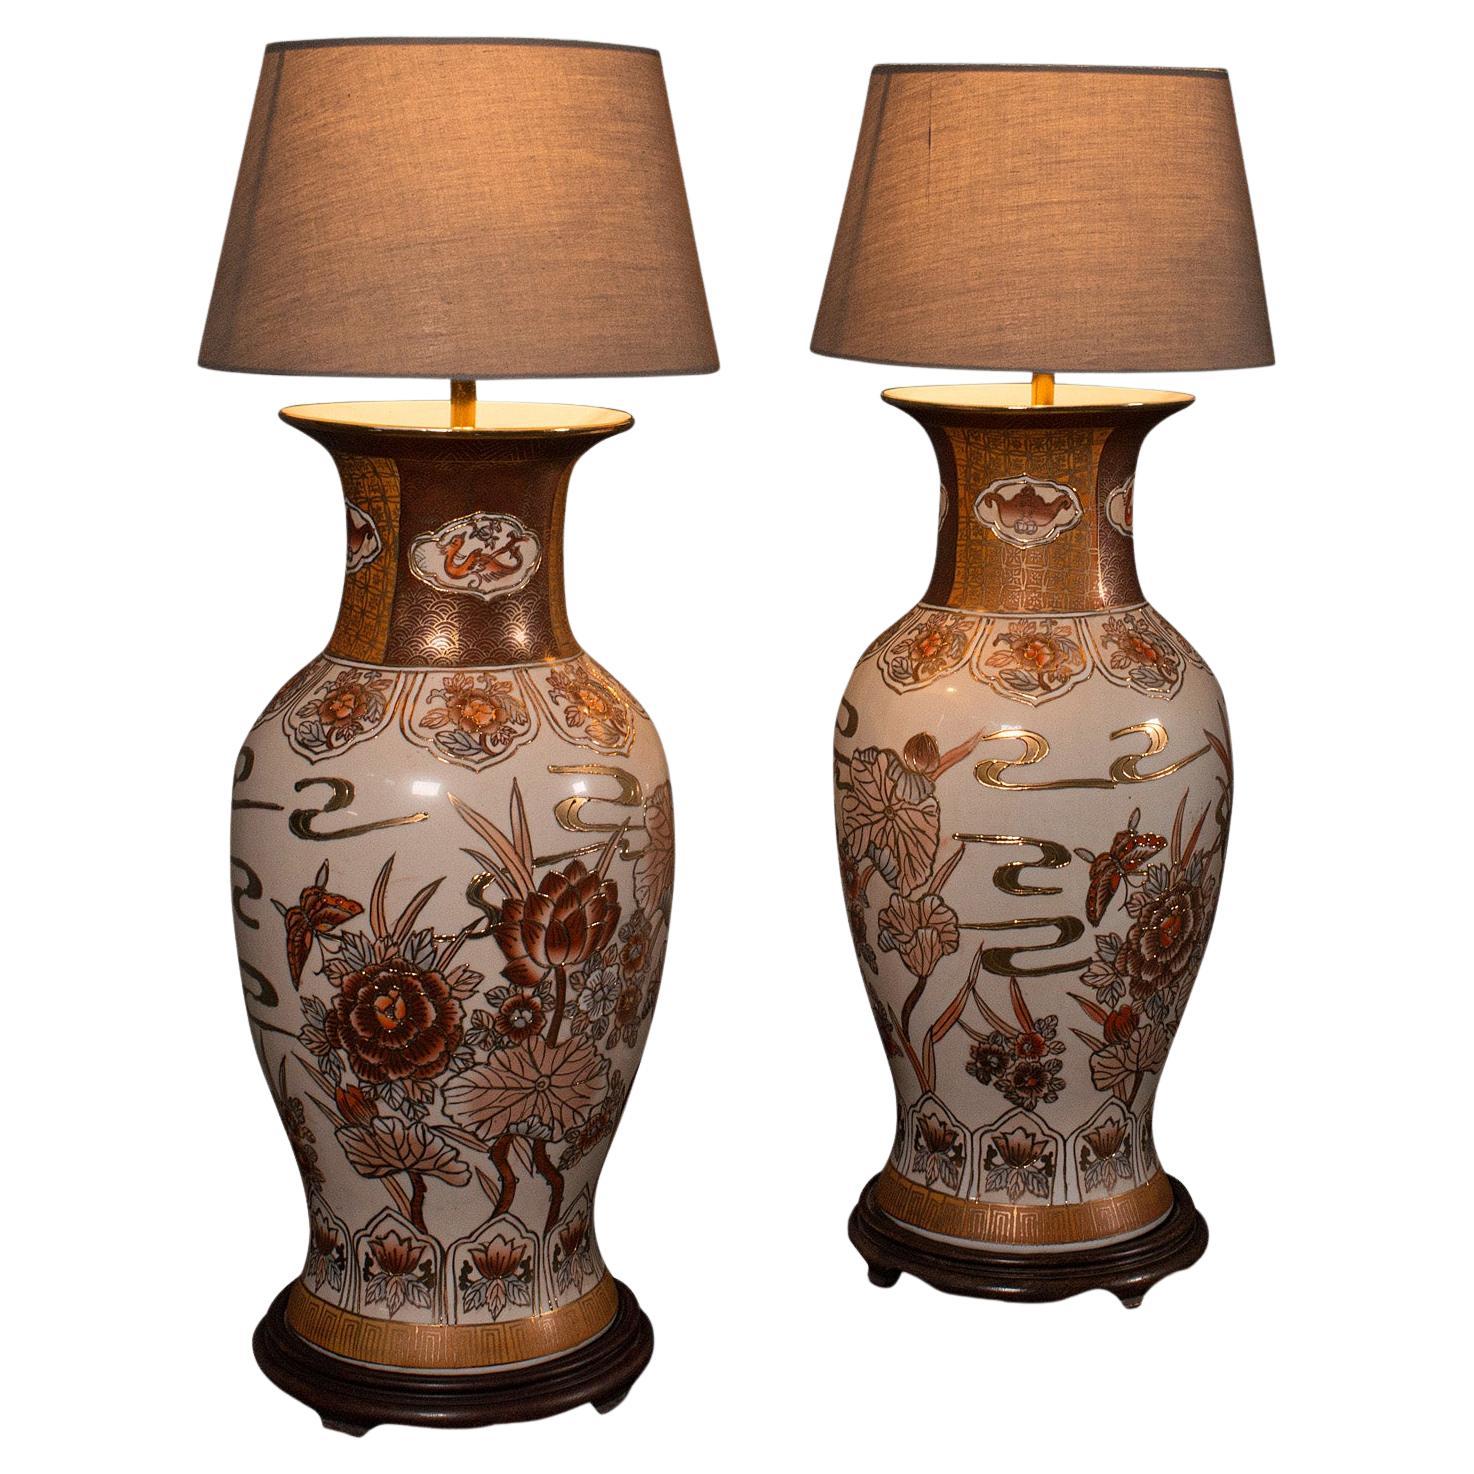 Pair of Vintage Table Lamps, Chinese, Ceramic, Decorative Light, Art Deco, 1940 For Sale